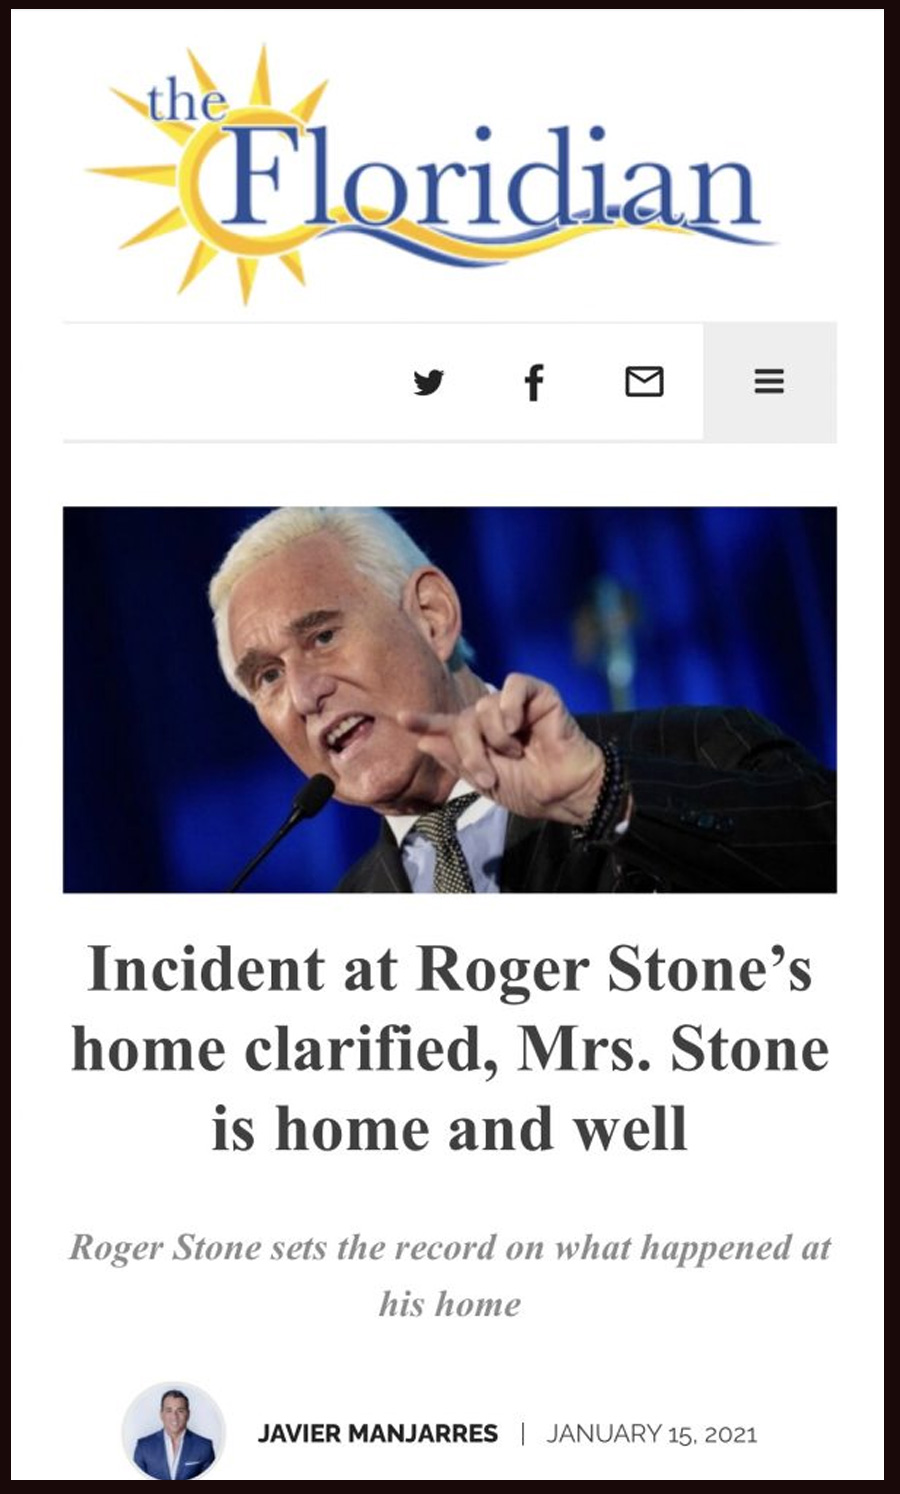 Incident at Roger Stone’s home clarified, Mrs. Stone is home and well.
Roger Stone sets the record on what happened at his home